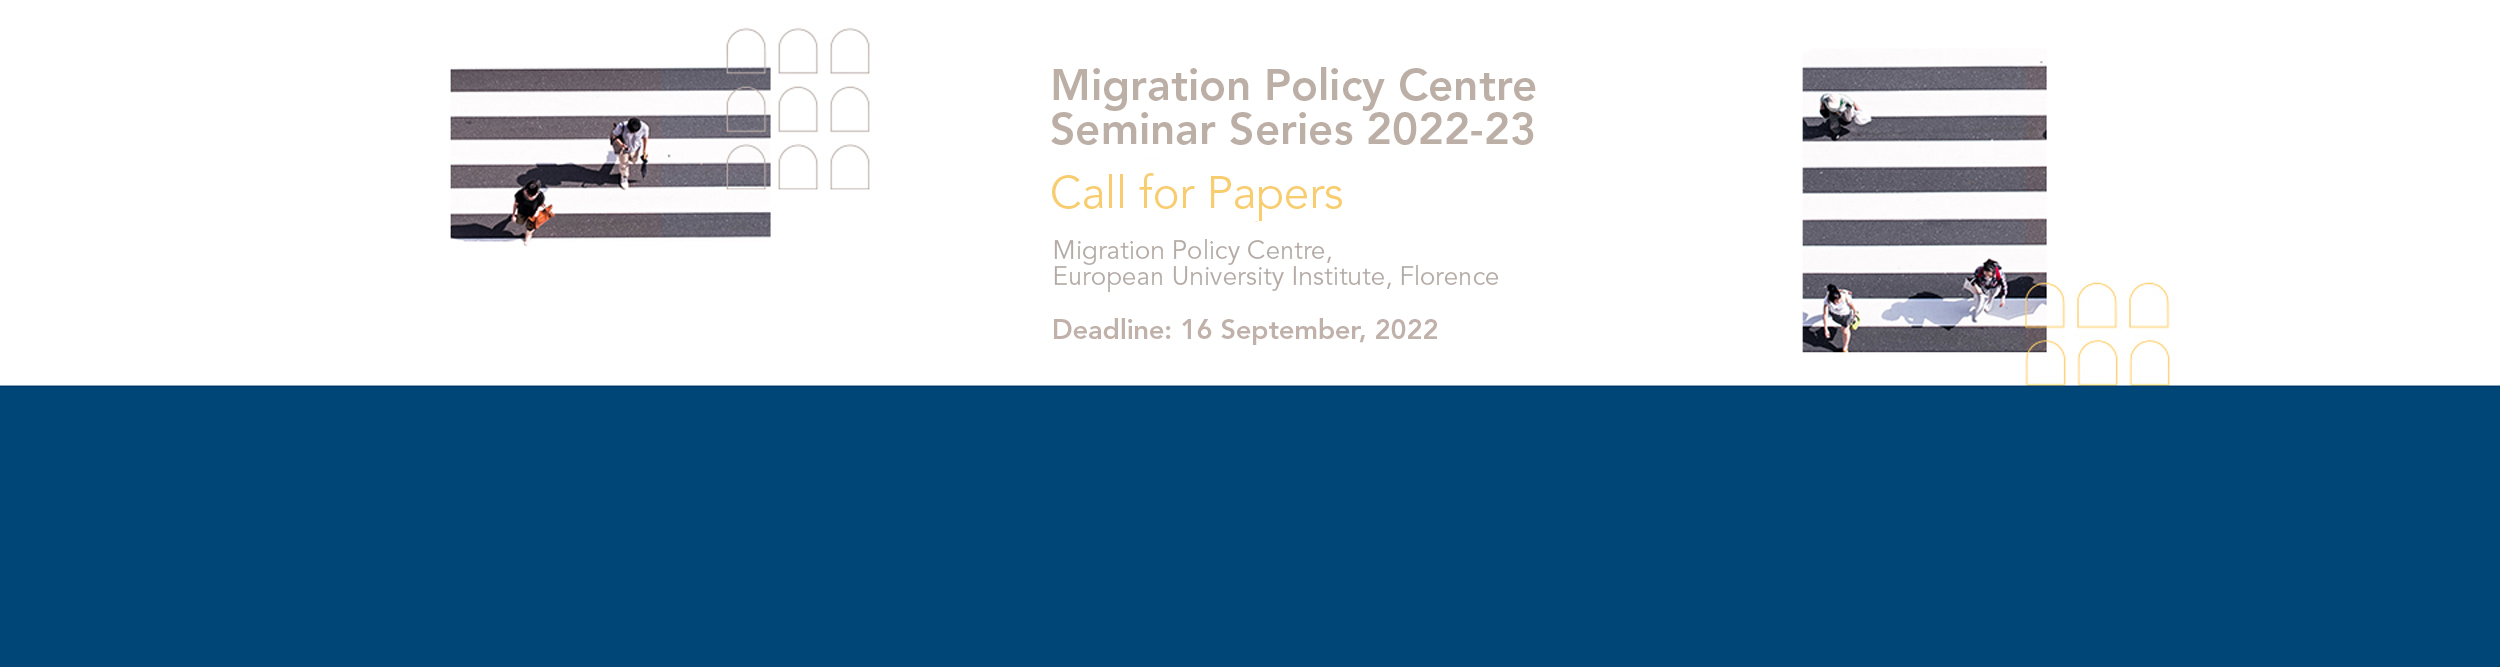 Permalink to:Call for papers: present your new research at ‘Migration Policy Centre Seminar Series 2022-23’